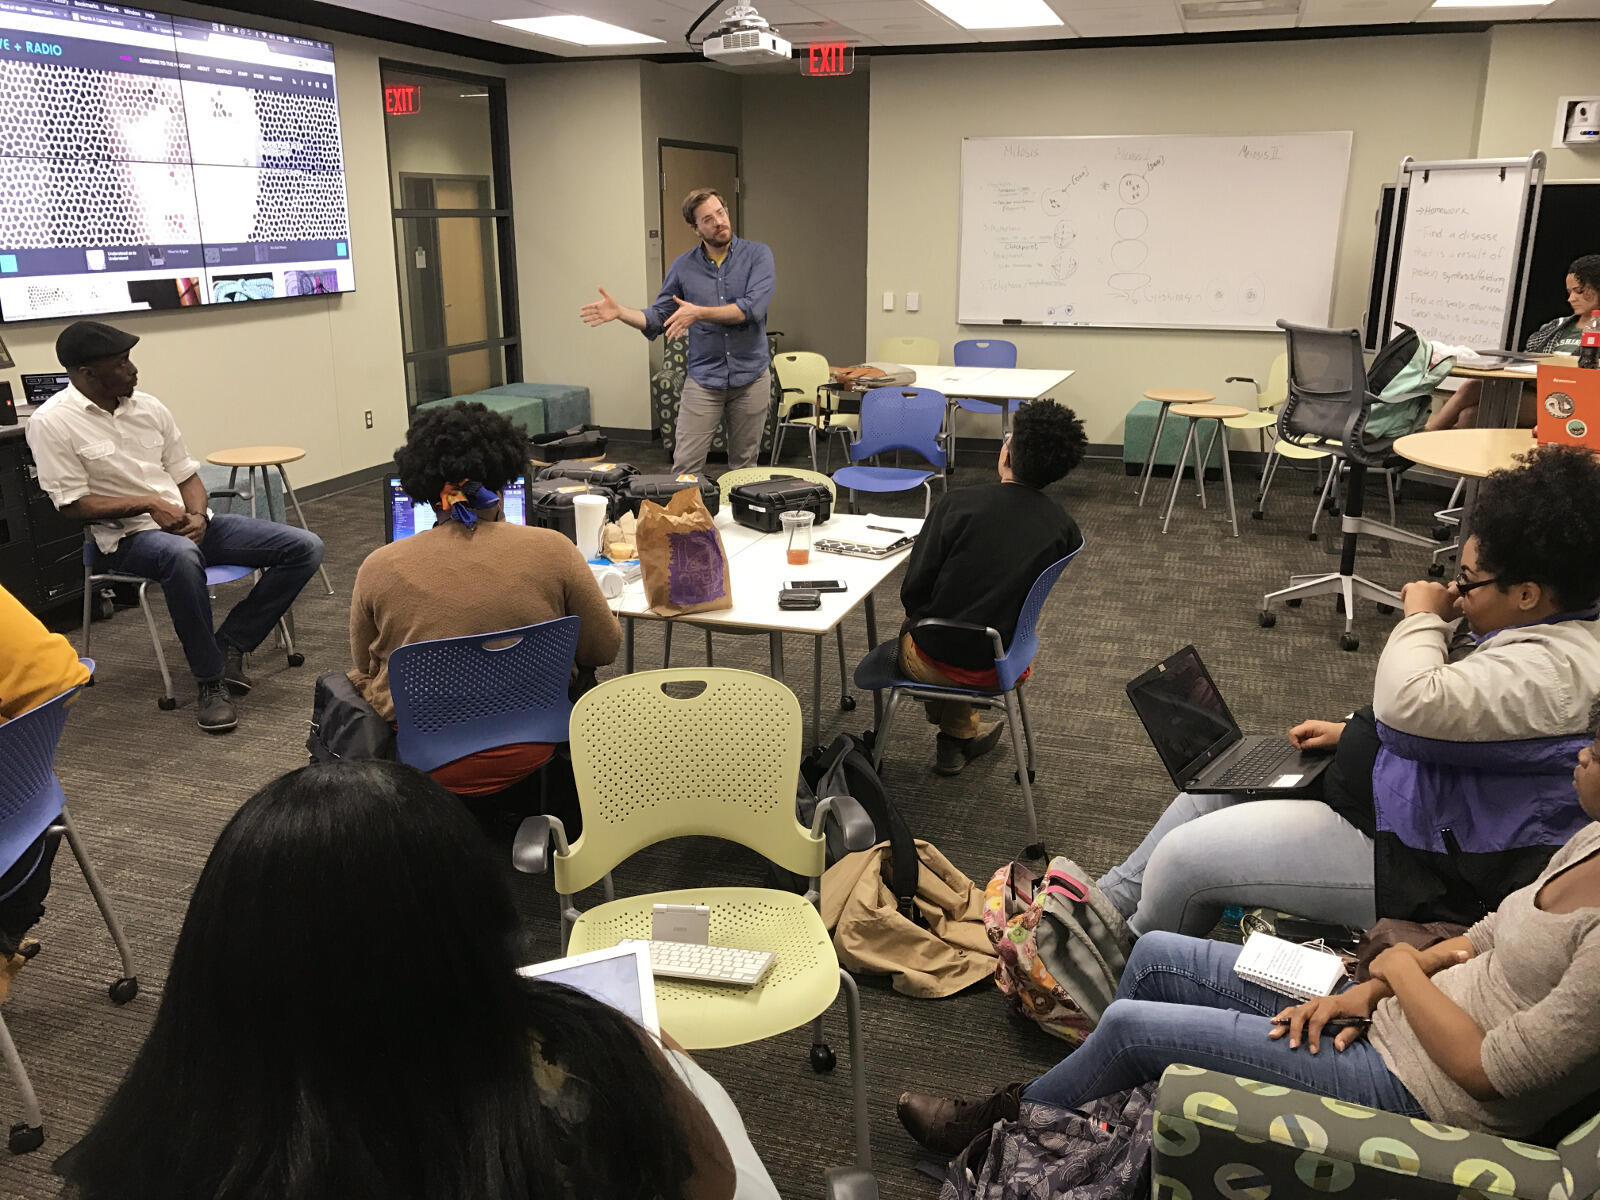 Nick van der Kolk, creator and host of the podcast “Love + Radio,” visited the "Podcasting While Black" class last week to give tips on drawing great stories out of interview subjects.
